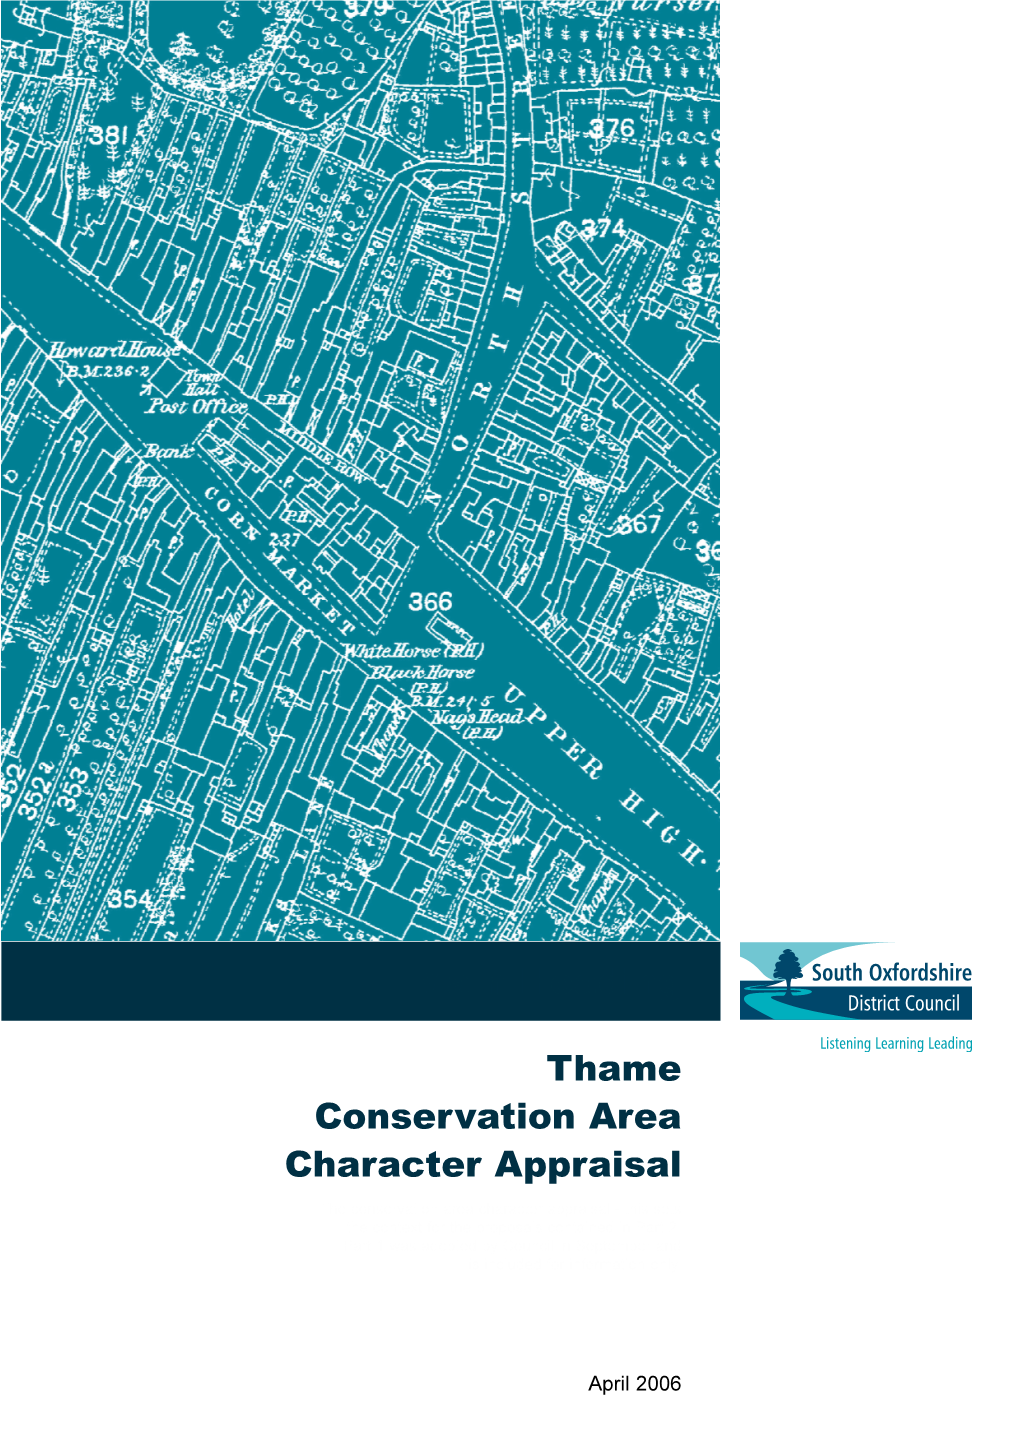 Main Heading Thame Conservation Area Character Appraisal